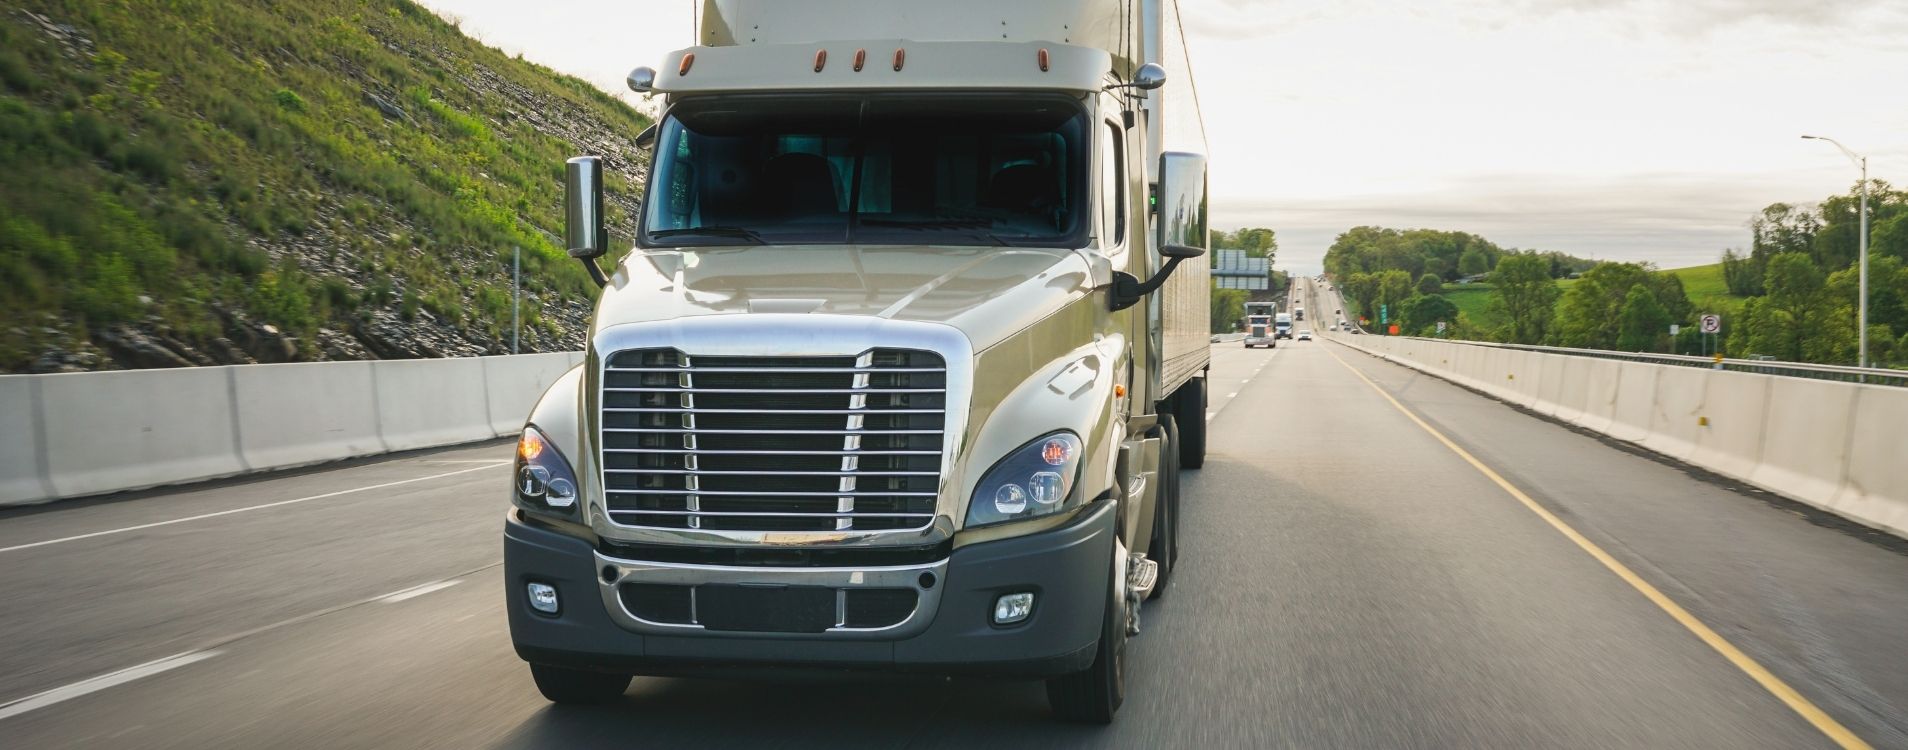 Low Down Payment Semi Trucks A Path Toward Purchase